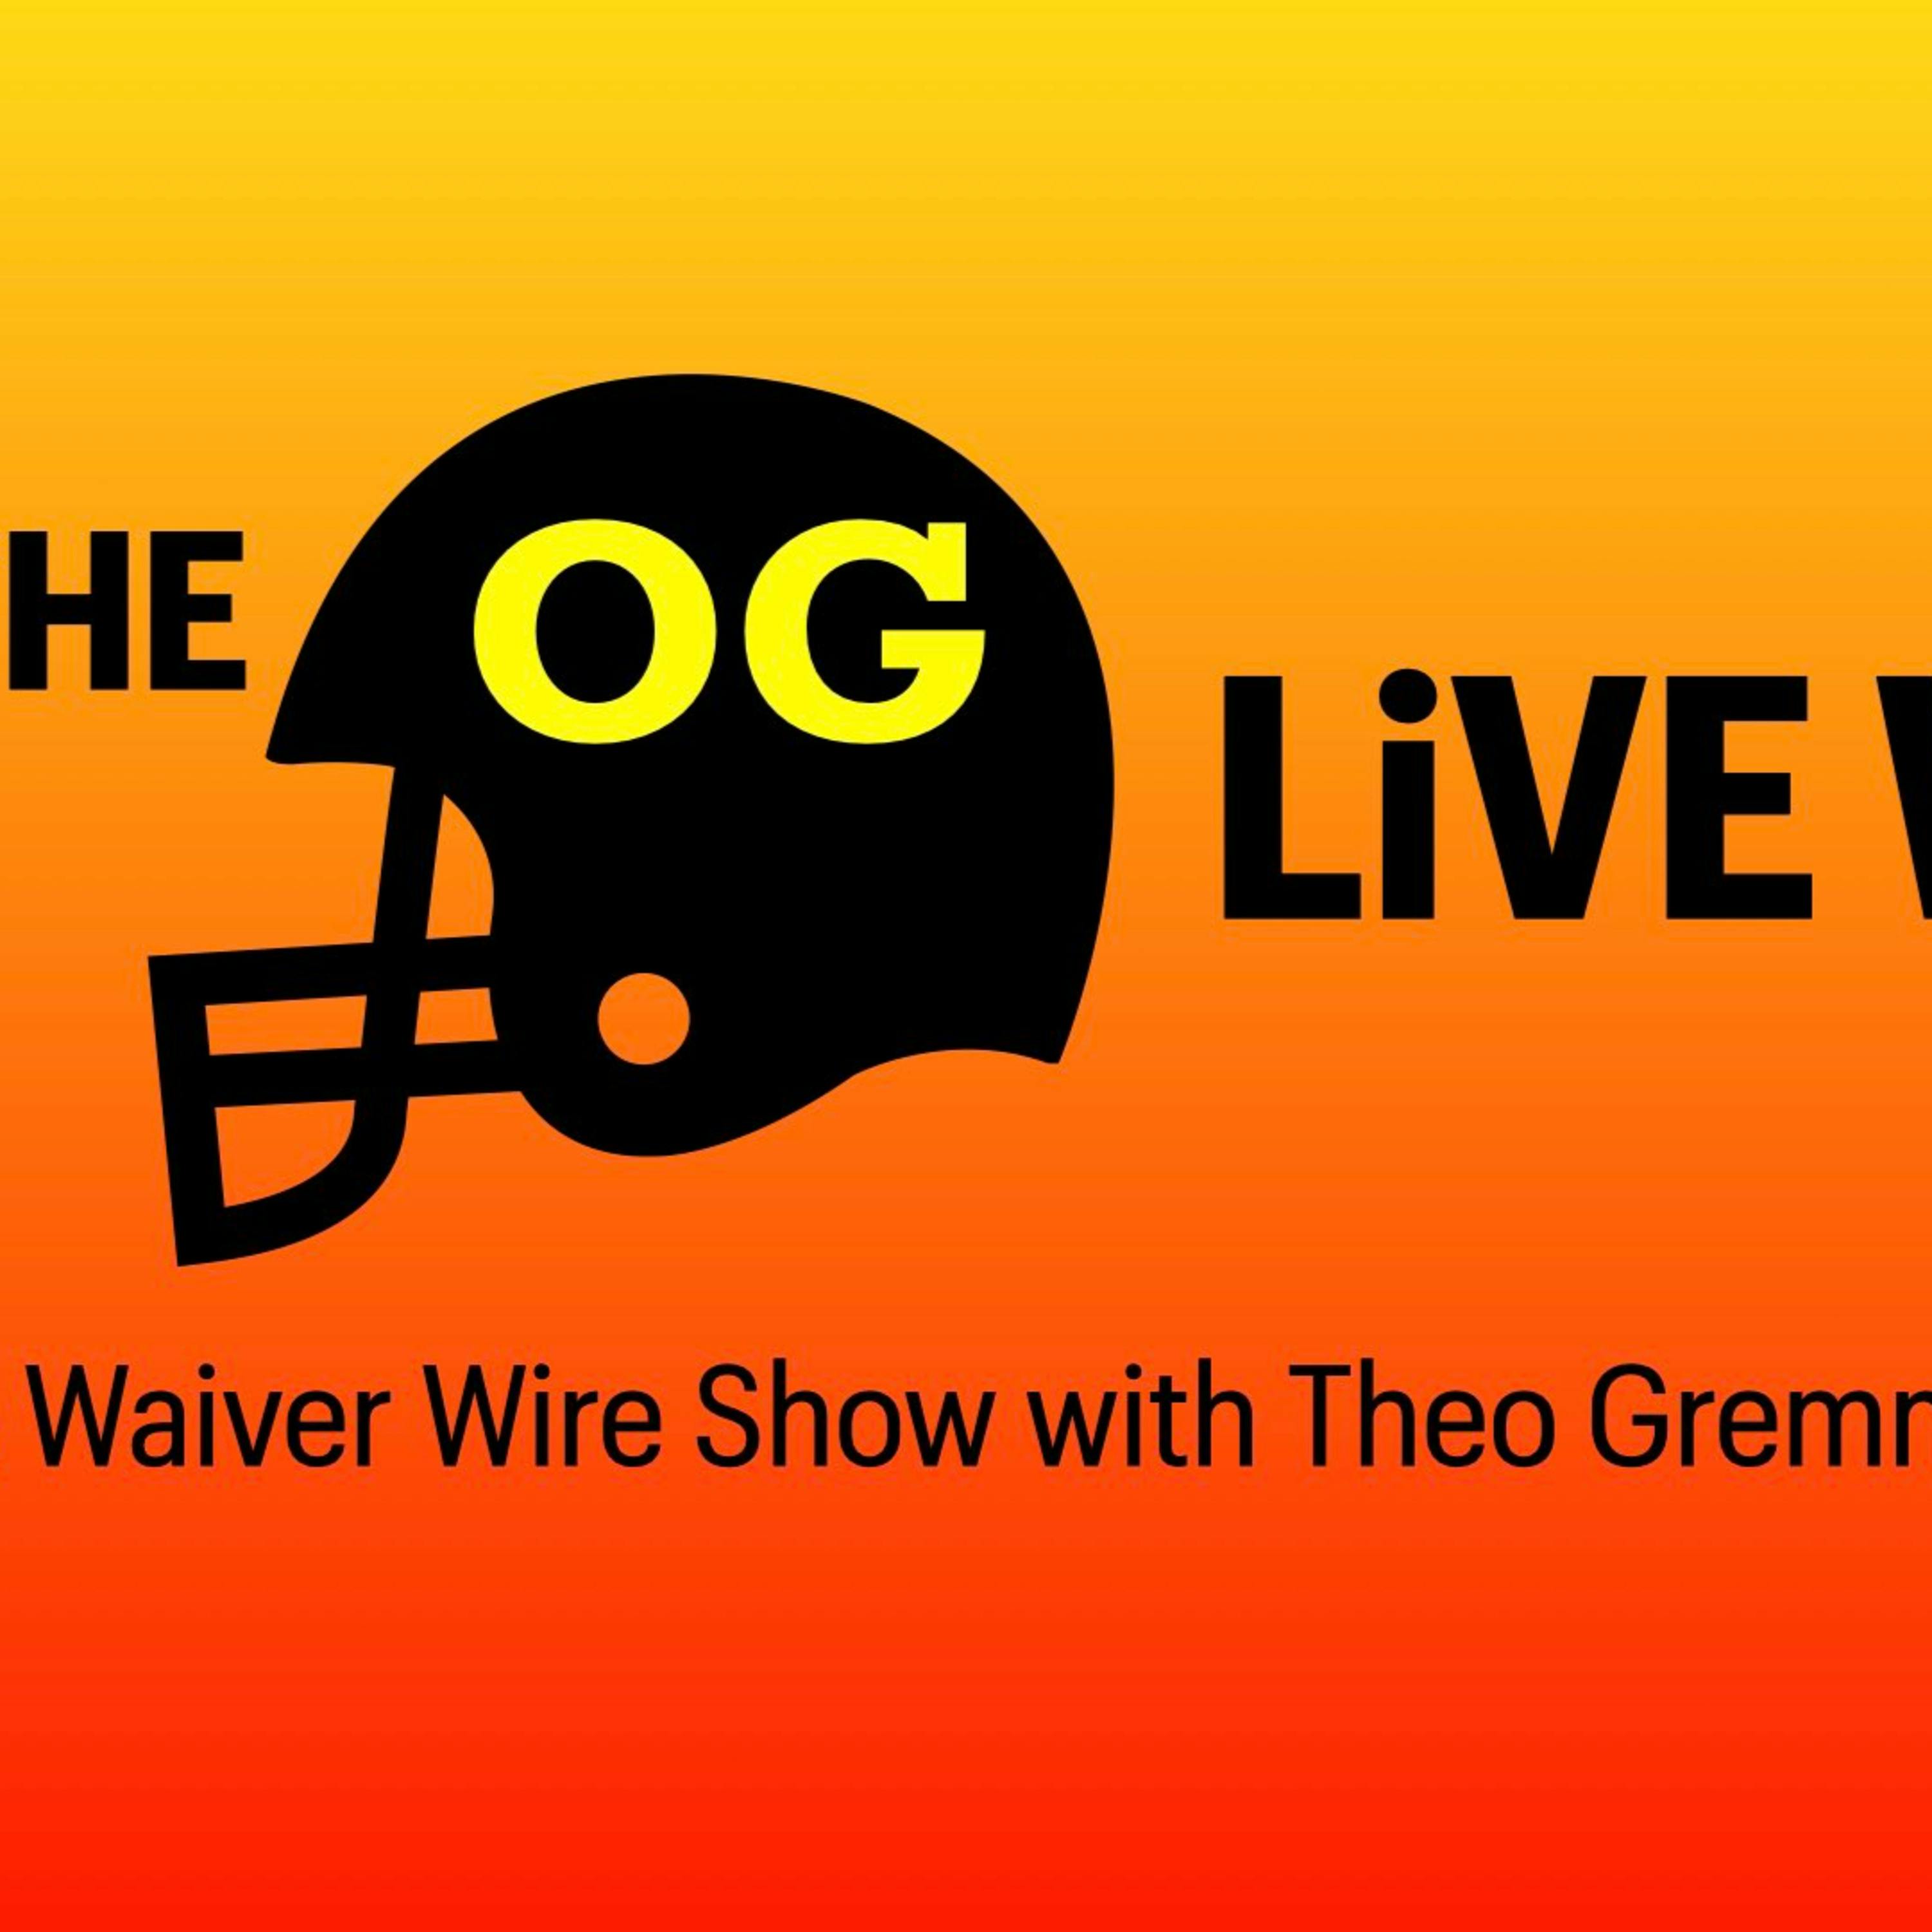 iS JAMYCAL HASTY MORE TASTY? | THE OG LiVE WiRE | WEEK 8